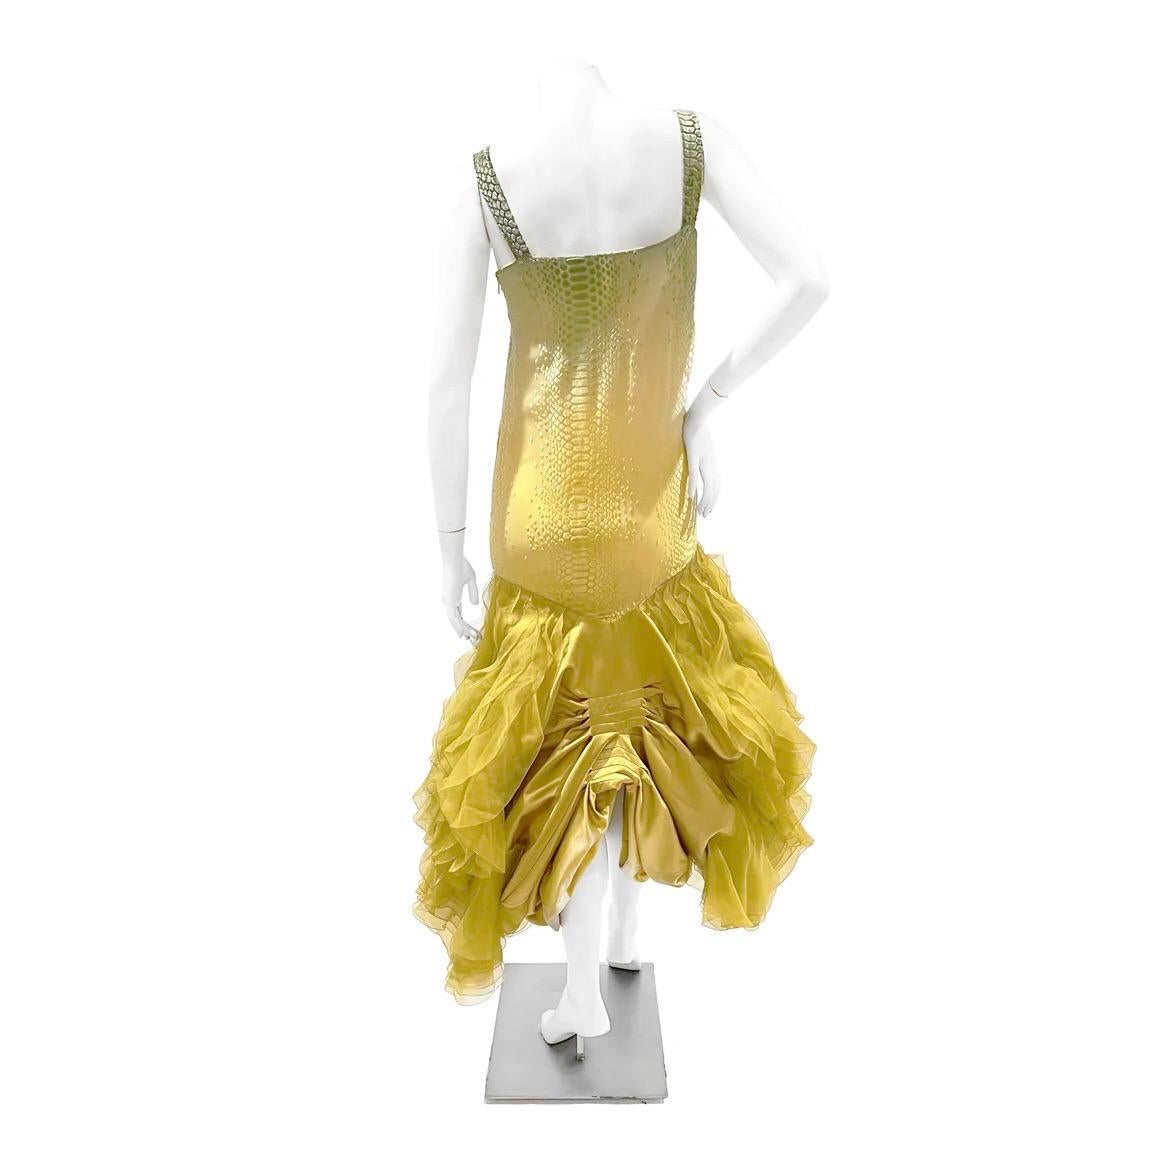 Ruched Yellow Ruffle Reptile Print Gown by John Galliano for Christian Dior
Fall / Winter 2004 Ready-To-Wear
Look 2
Yellow with green gradient detail on top
Reptile print detail on top of gown
Sheer yellow ruffle embellishment on sides of